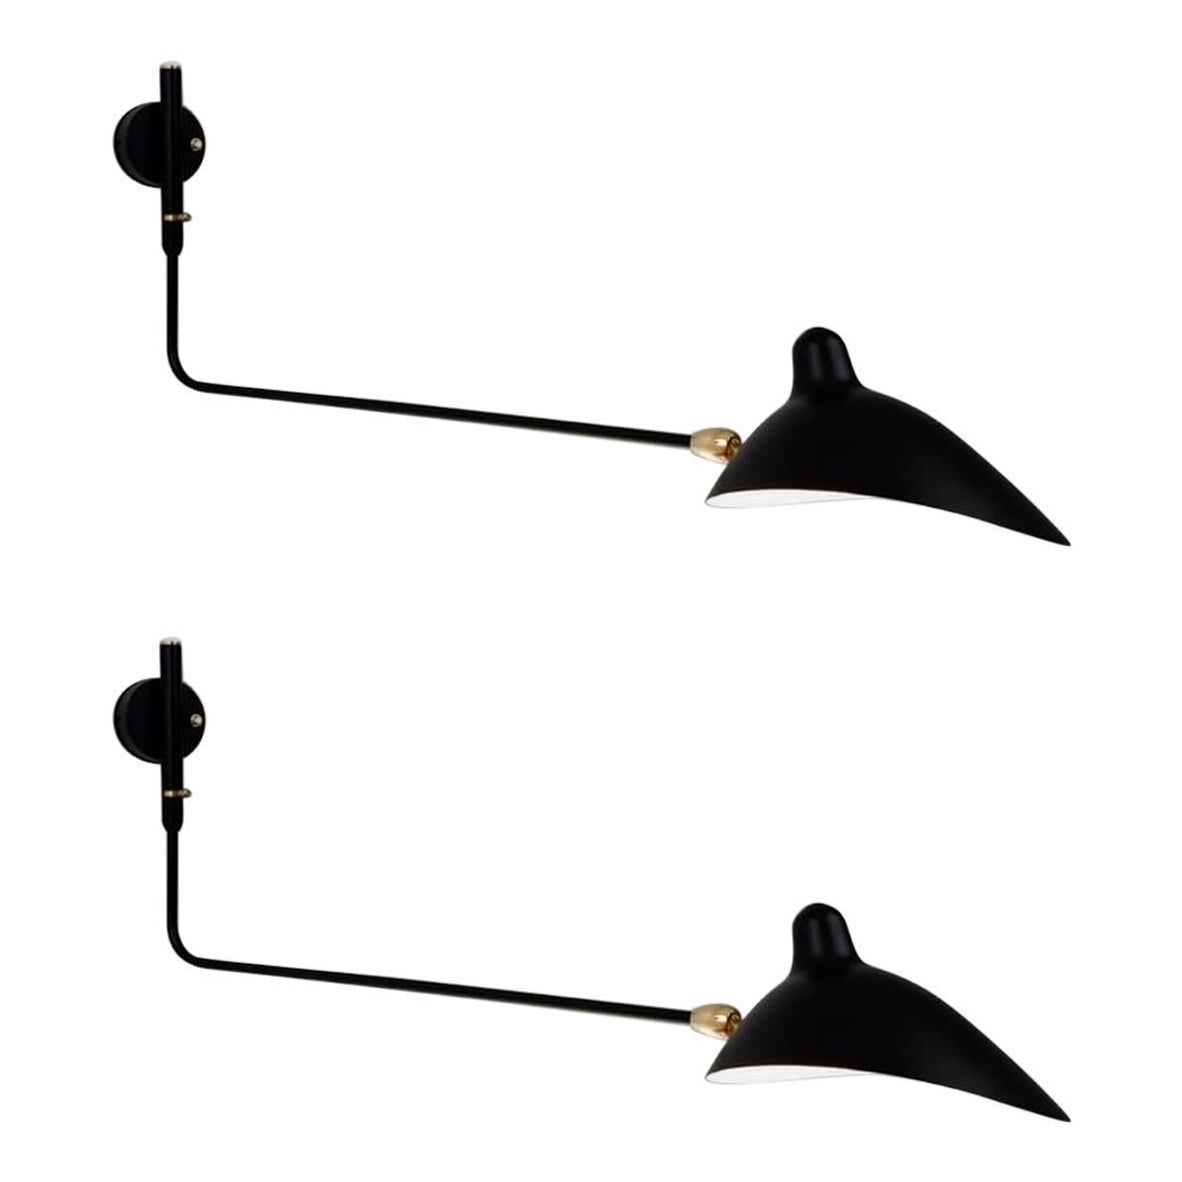 Serge Mouille - Pair of Rotating Sconces with 1 Arm in Black - IN STOCK! For Sale